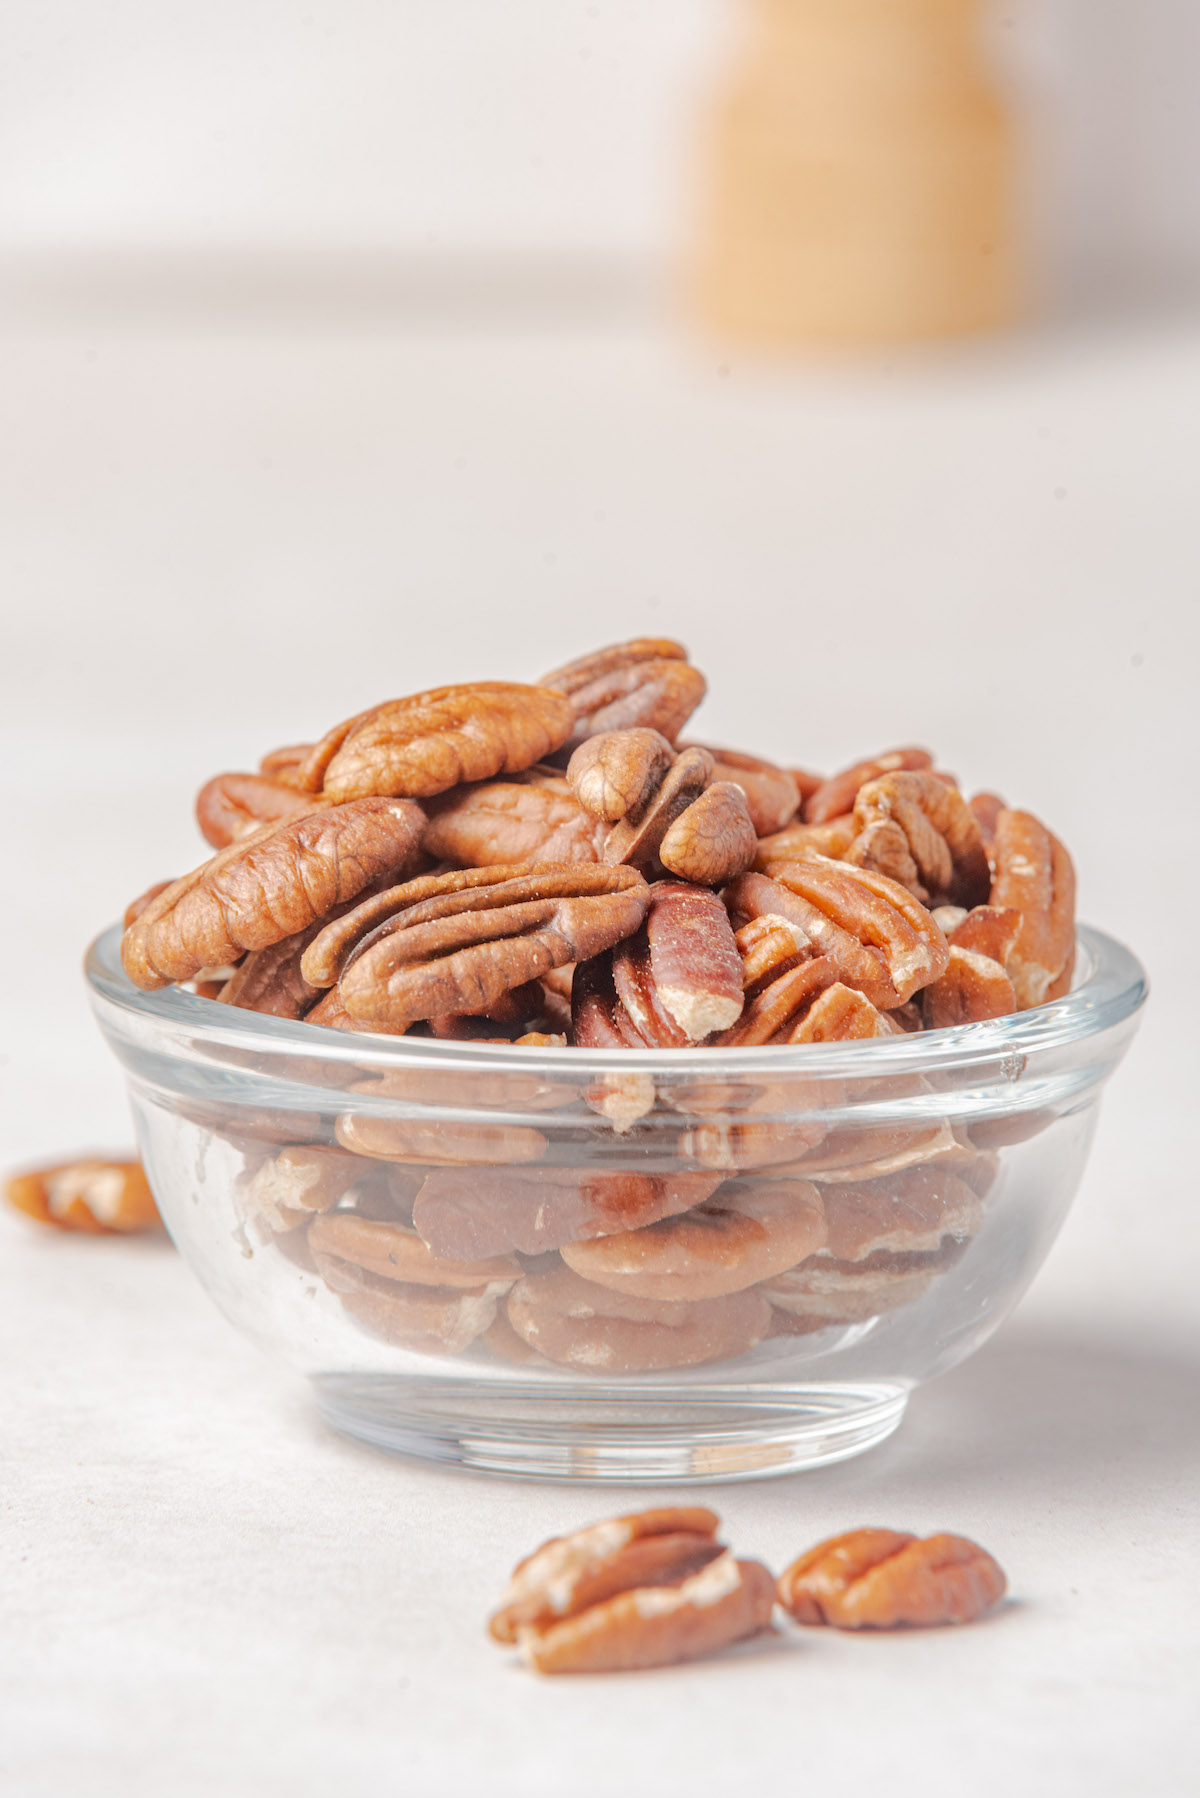 the finished how to toast pecans recipe served in a glass bowl